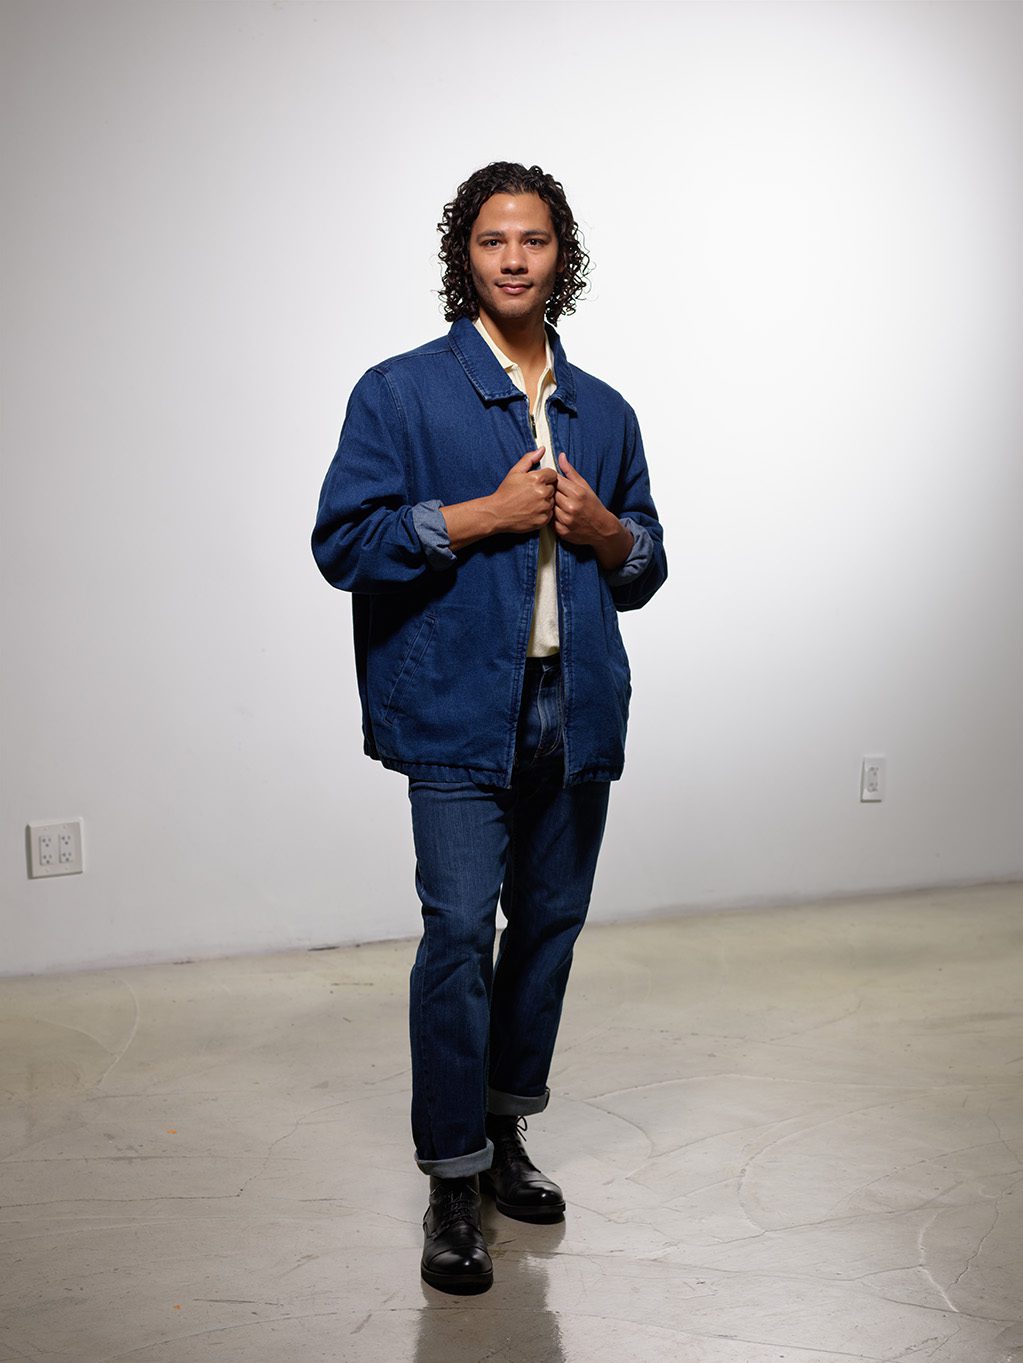 Joseph A. Hernandez poses for the camera with a slight smile. He is a brown-skinned man with medium-length curly brown hair and brown eyes. He is wearing a denim overshirt over a white shirt with blue jeans.